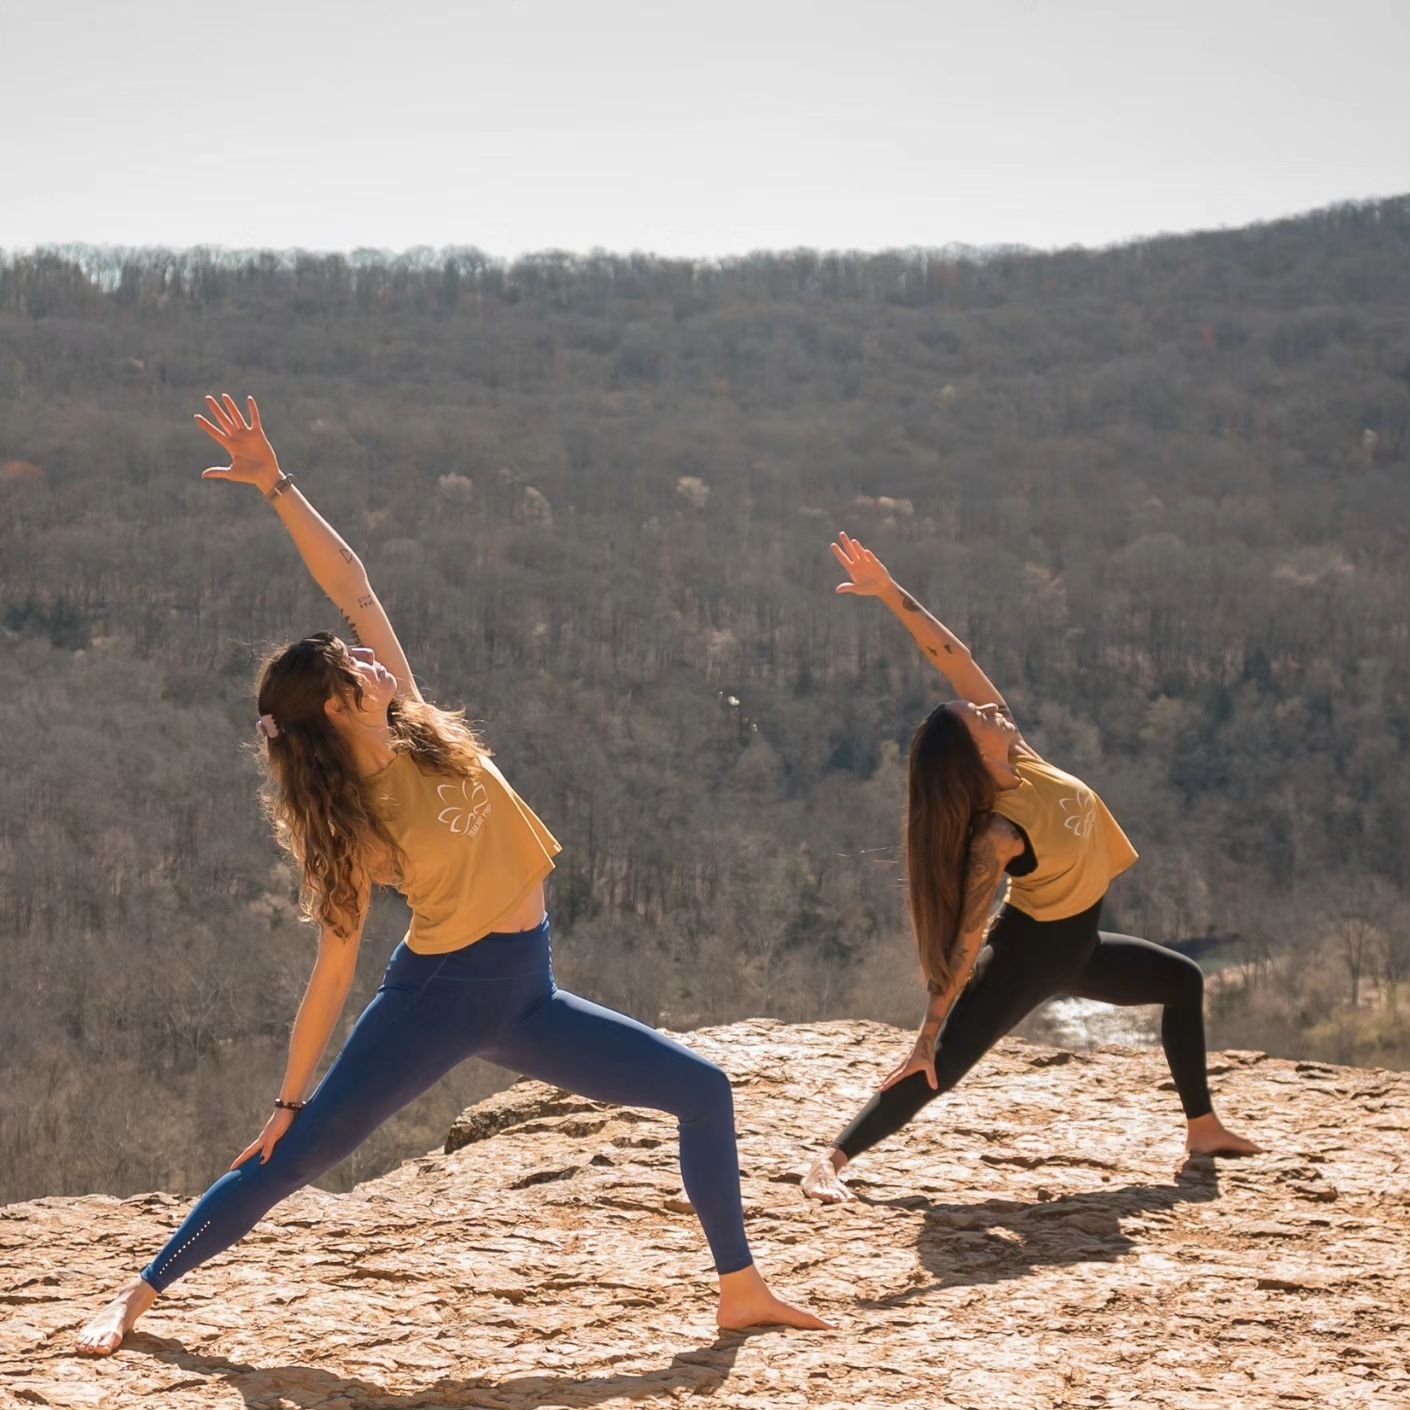 Rise + Shine with us atop Devil's Den's stunning Yellow Rock Overlook! 🌄

Join Ashleigh + Amanda for this 4-part outdoor yoga series starting May 17th. Hike + Yoga Sunrise Series offers a chance to take in nature, connect with community, practice ou